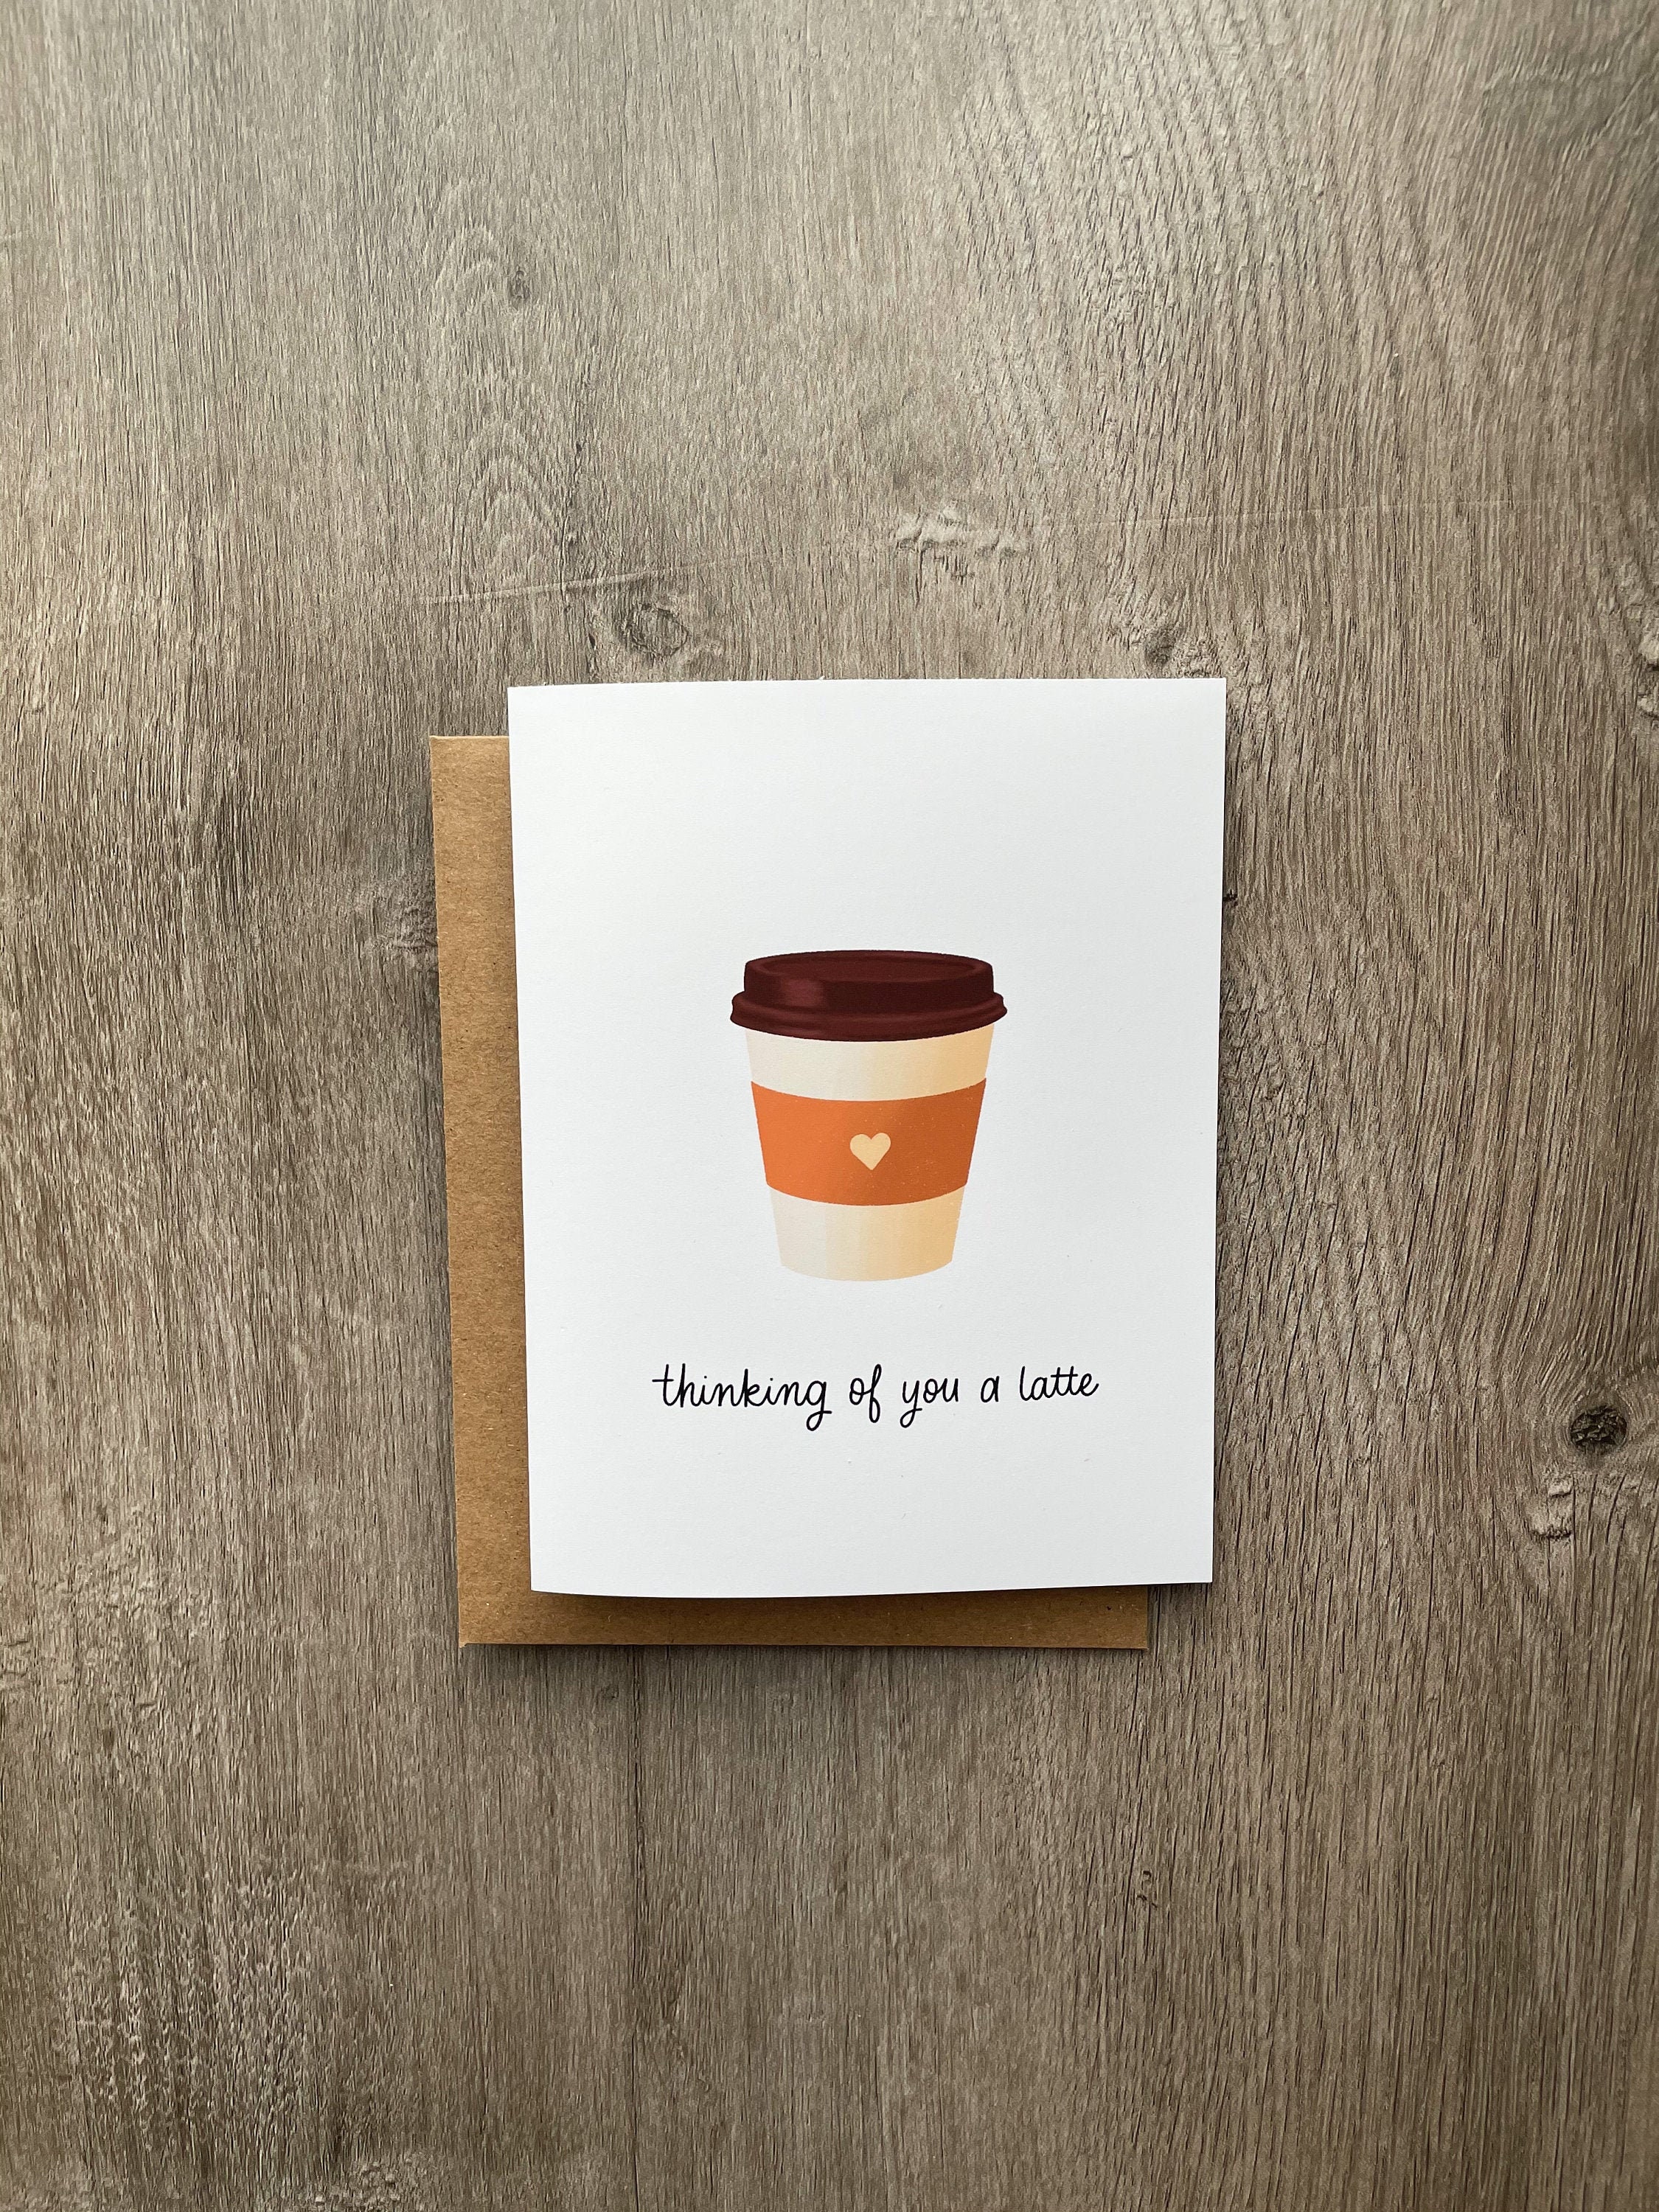 Halloween Coffee Cups Pumpkin Latte For Friend Greeting Card New W/ TRACKING 